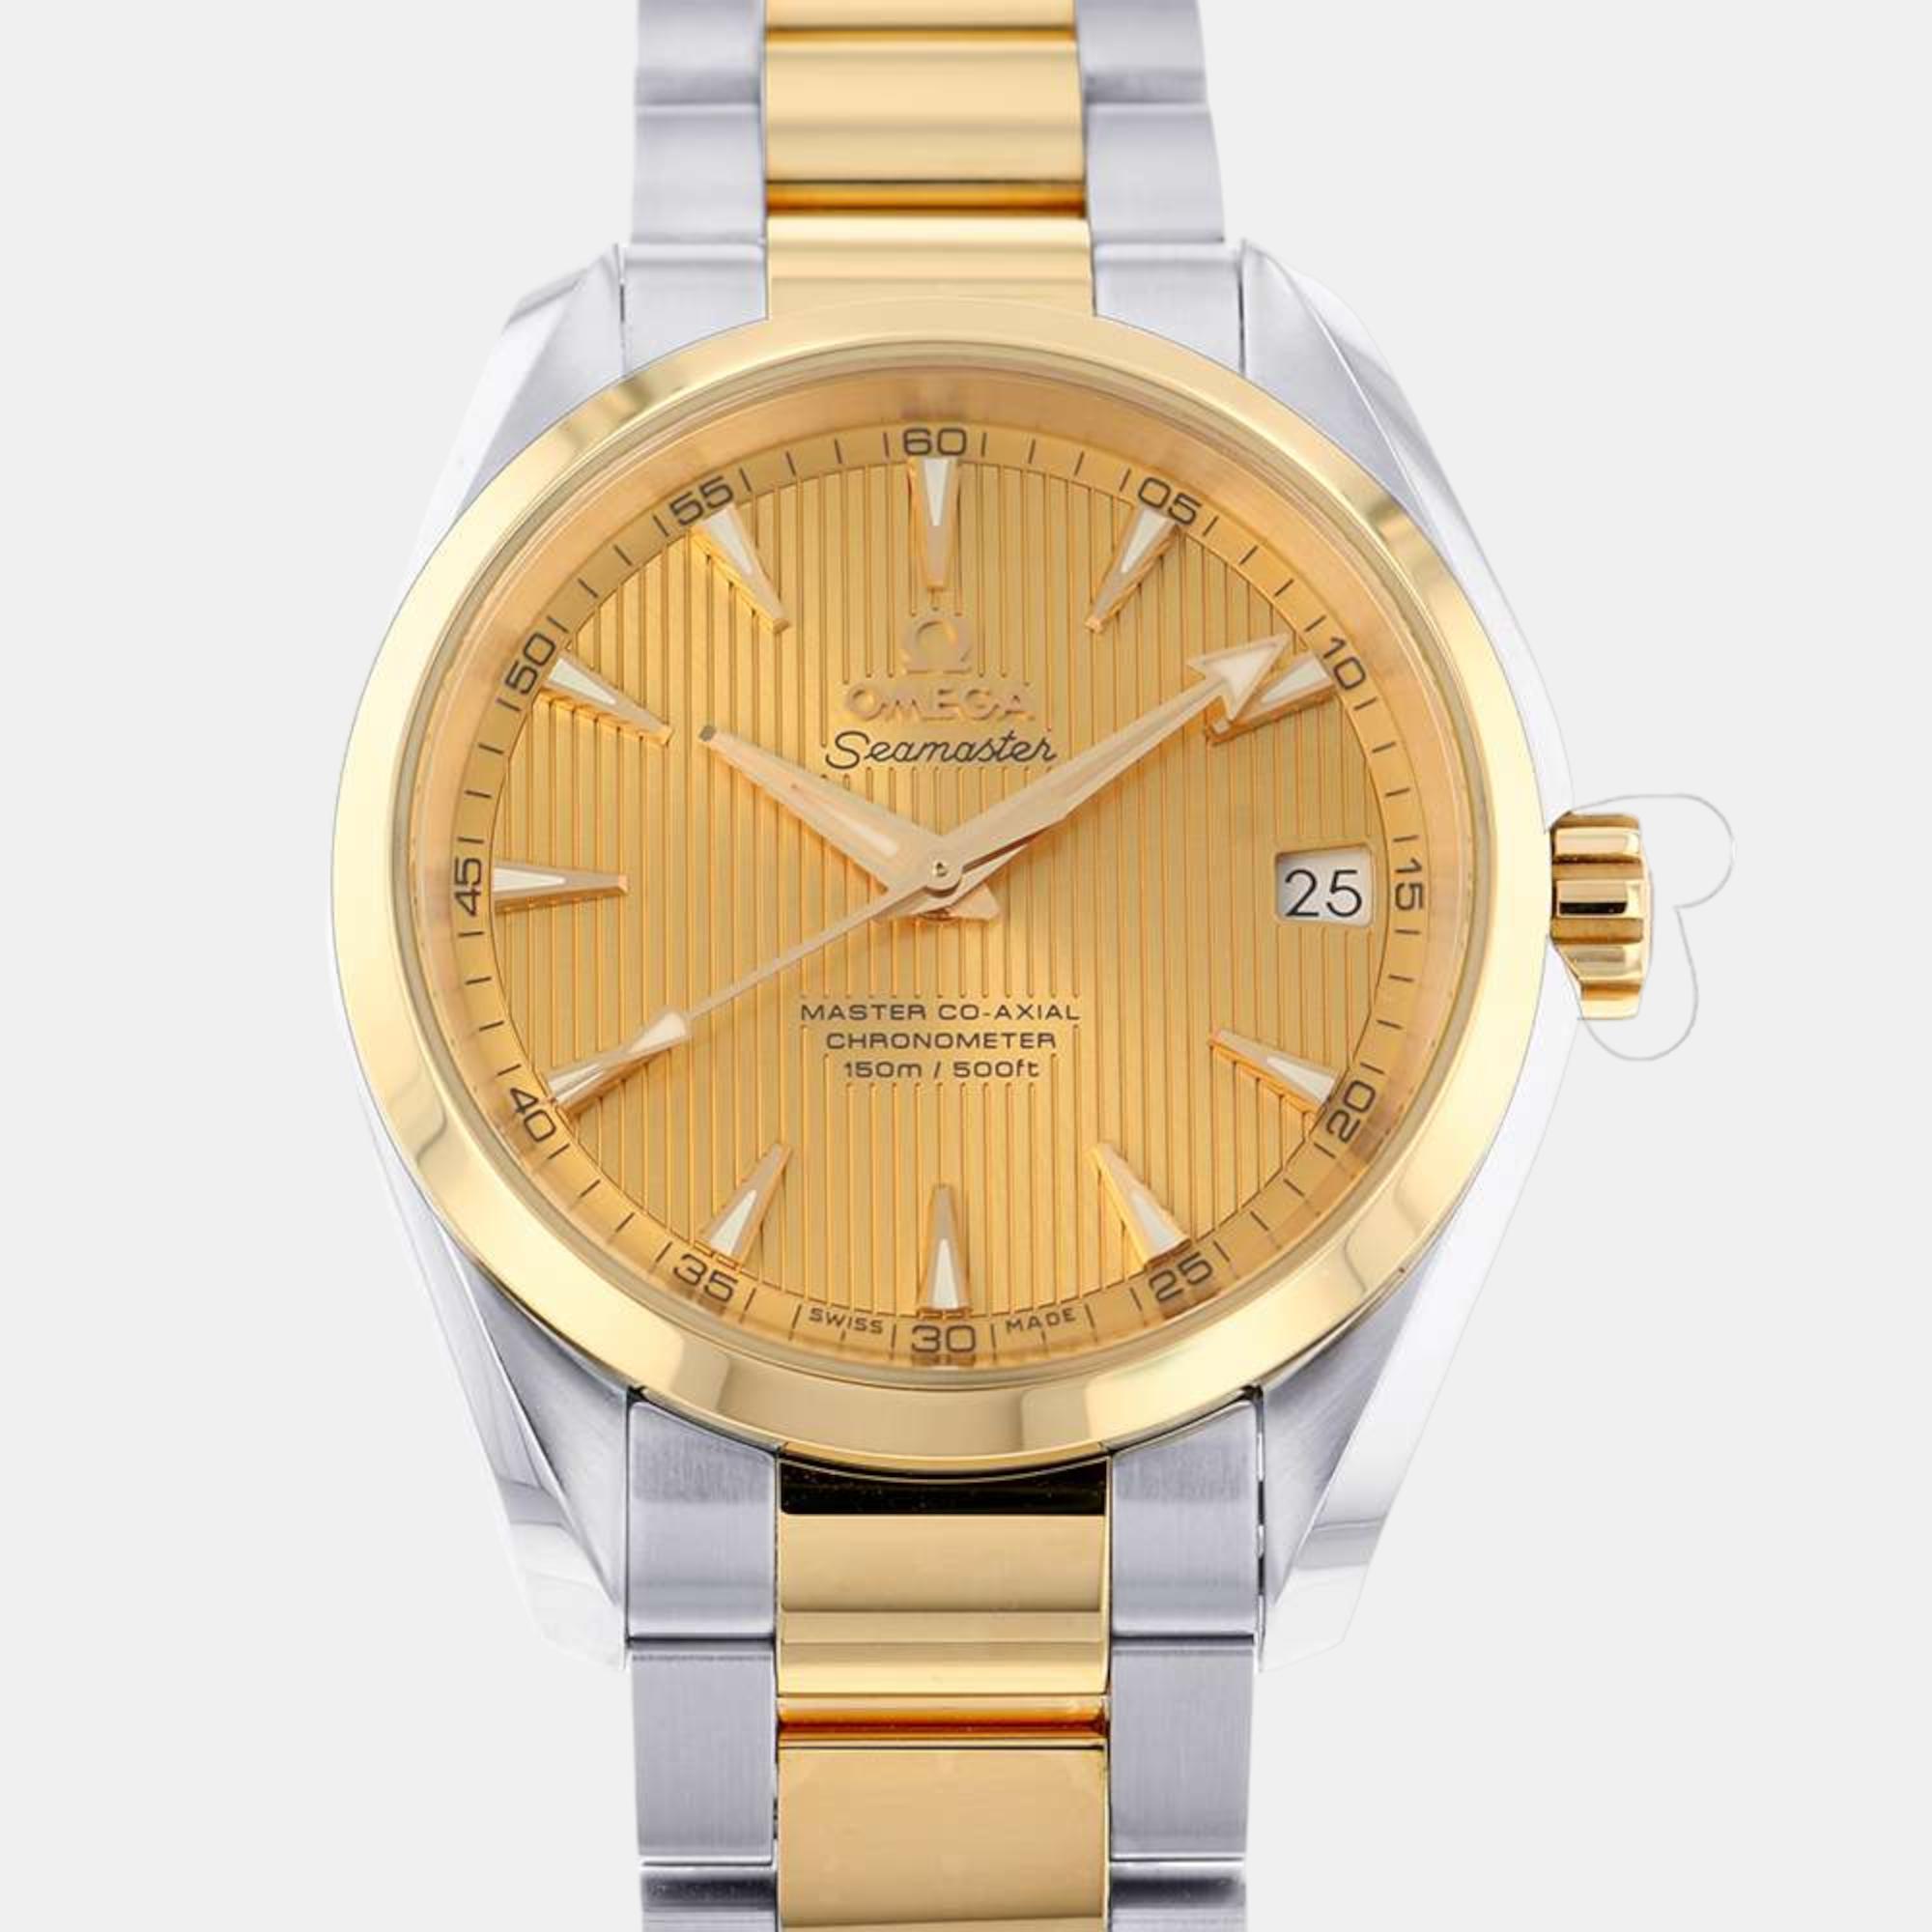 Omega gold 18k yellow gold and stainless steel seamaster aqua terra 231.20.39.21.08.001 automatic men's wristwatch 38.5 mm